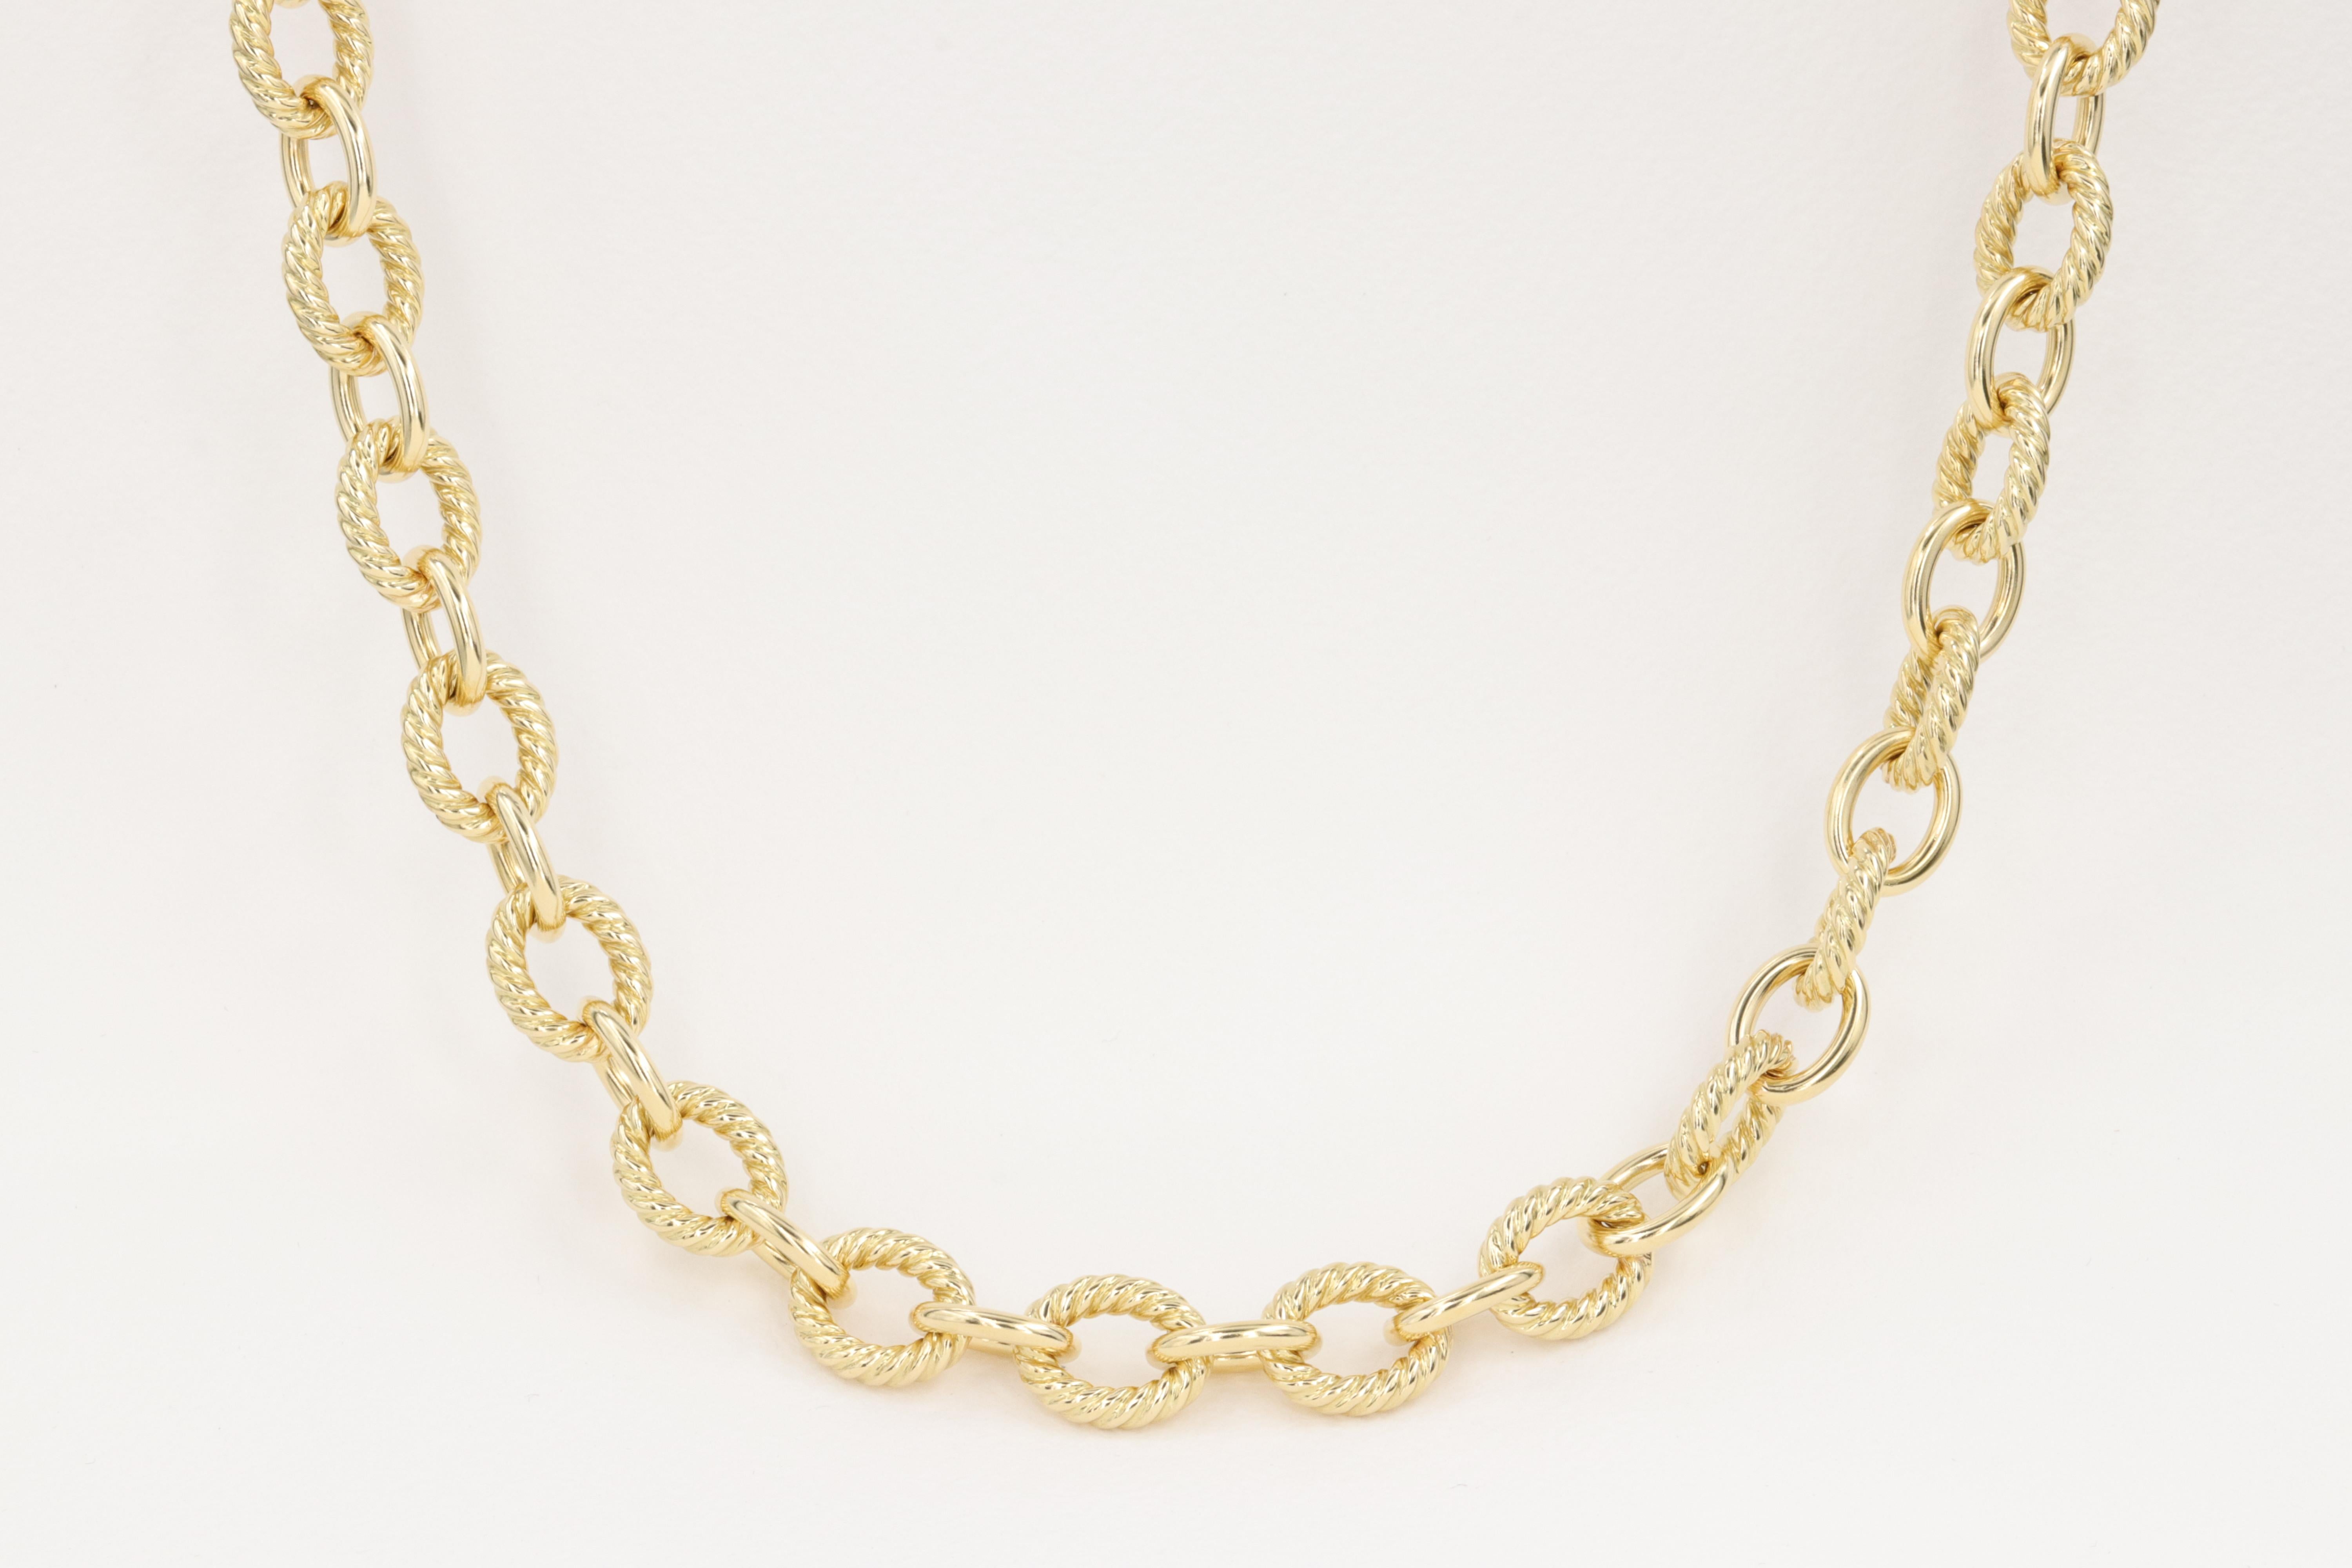 David Yurman Oval Cable Link Chain Necklace in 18 Karat Yellow Gold 22 Inches

Necklace:

Length - 22 inches
Width - 12.5mm (Twist Links)
Metal - 18 Karat Yellow Gold 
Weight - 82.5 Grams
         